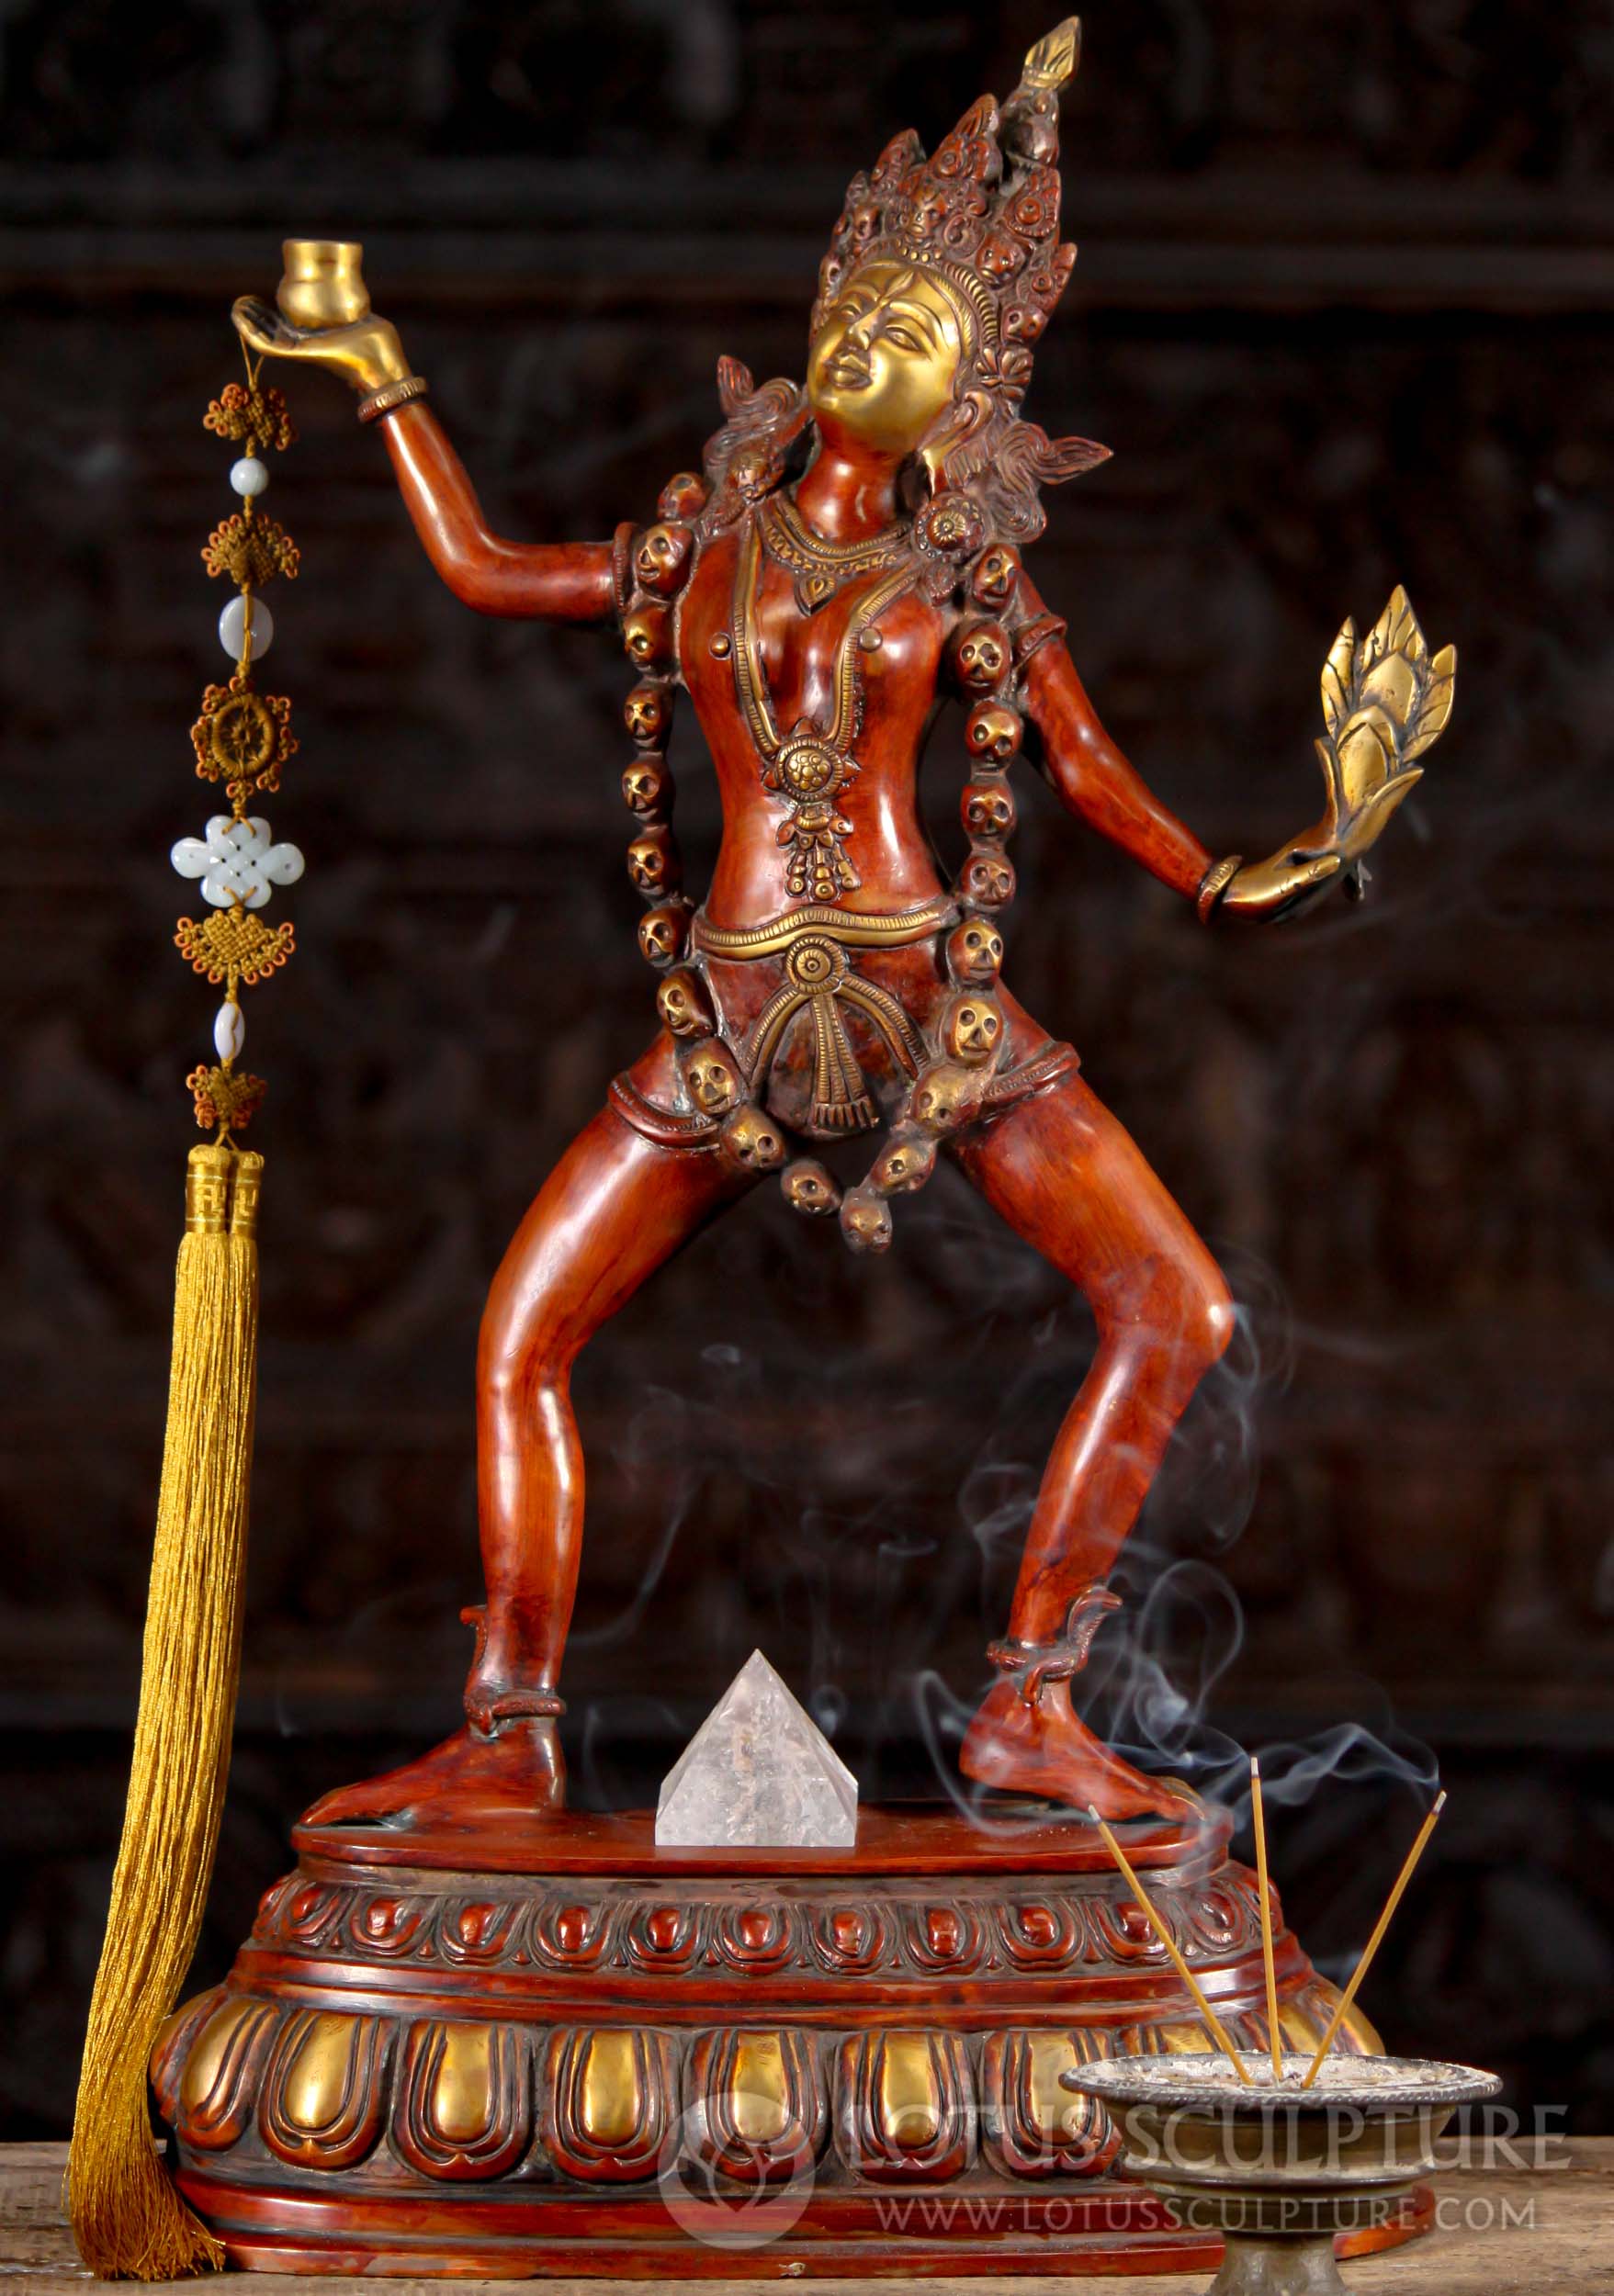 https://www.lotussculpture.com/mm5/graphics/00000001/50/1-red-copper-gold-standing-kali-with-skull-necklace-statue-c.jpg